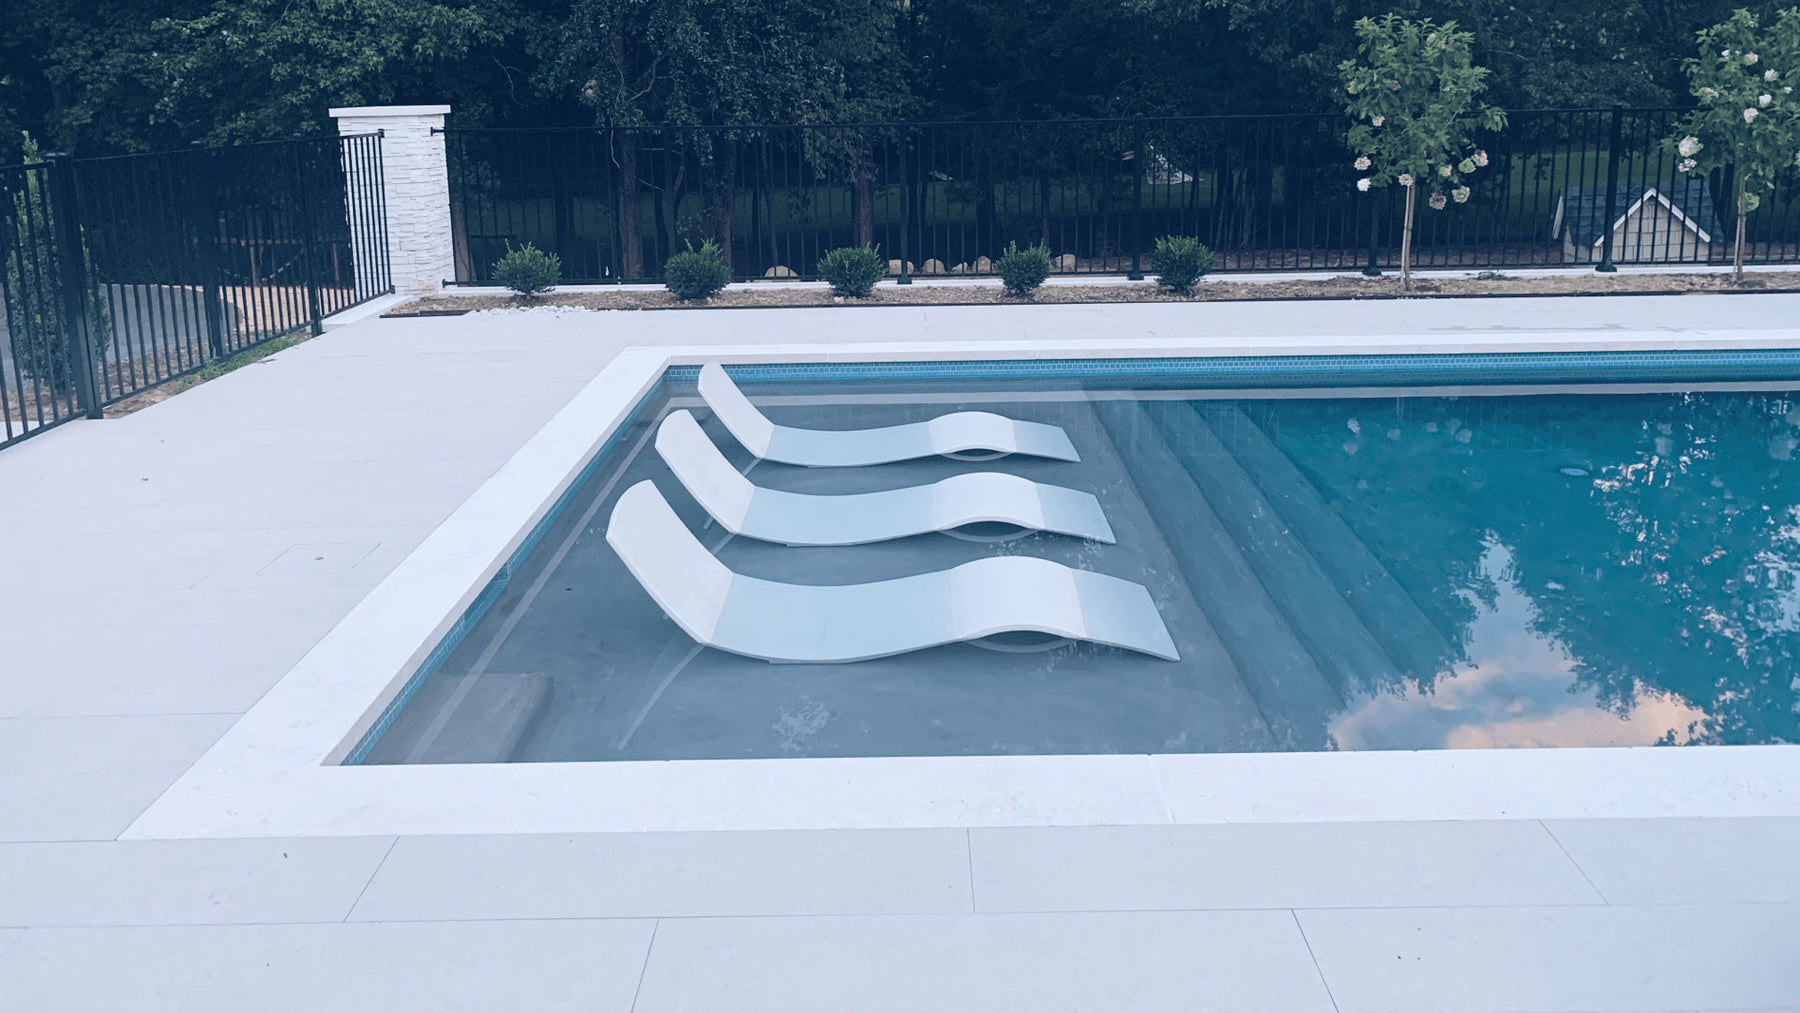 Three in-pool concrete chaise loungers on a pool tanning ledge.